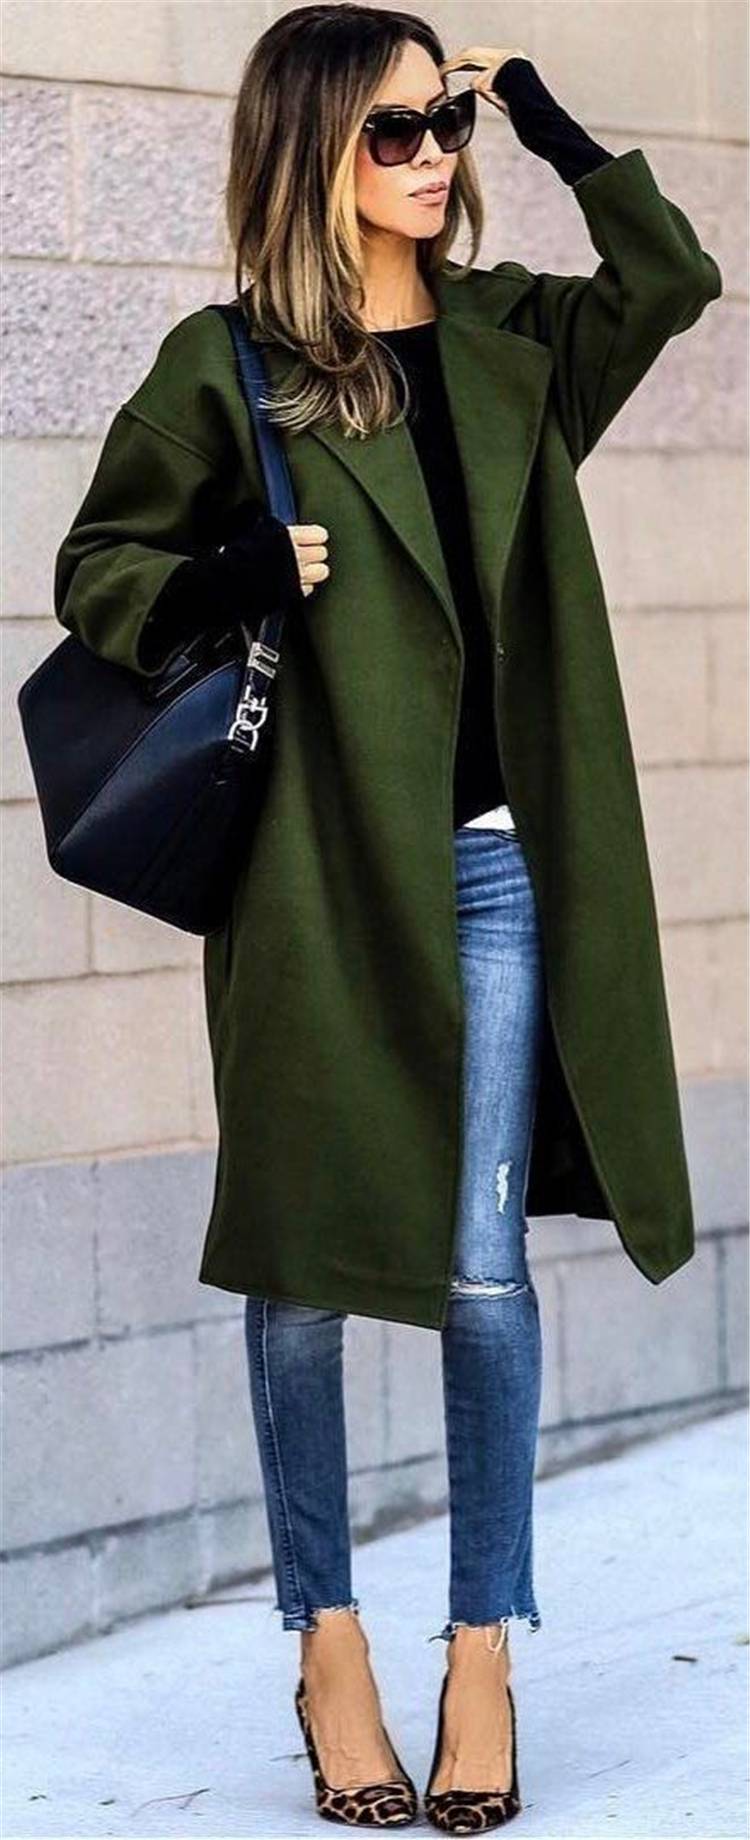 Cute And Glam Winter Outfits To Copy Now; Winter Outfits; Outfits; Winter Coat; Leather Coat; Trench Green Coat; Faux Fur Gilet; Winter Minitary Jacket; Winter Skirt #winteroutfit #outfits #trenchgreencoat #fauxfurgilet #wintermilitaryjacket #winterskirt #leathercoat